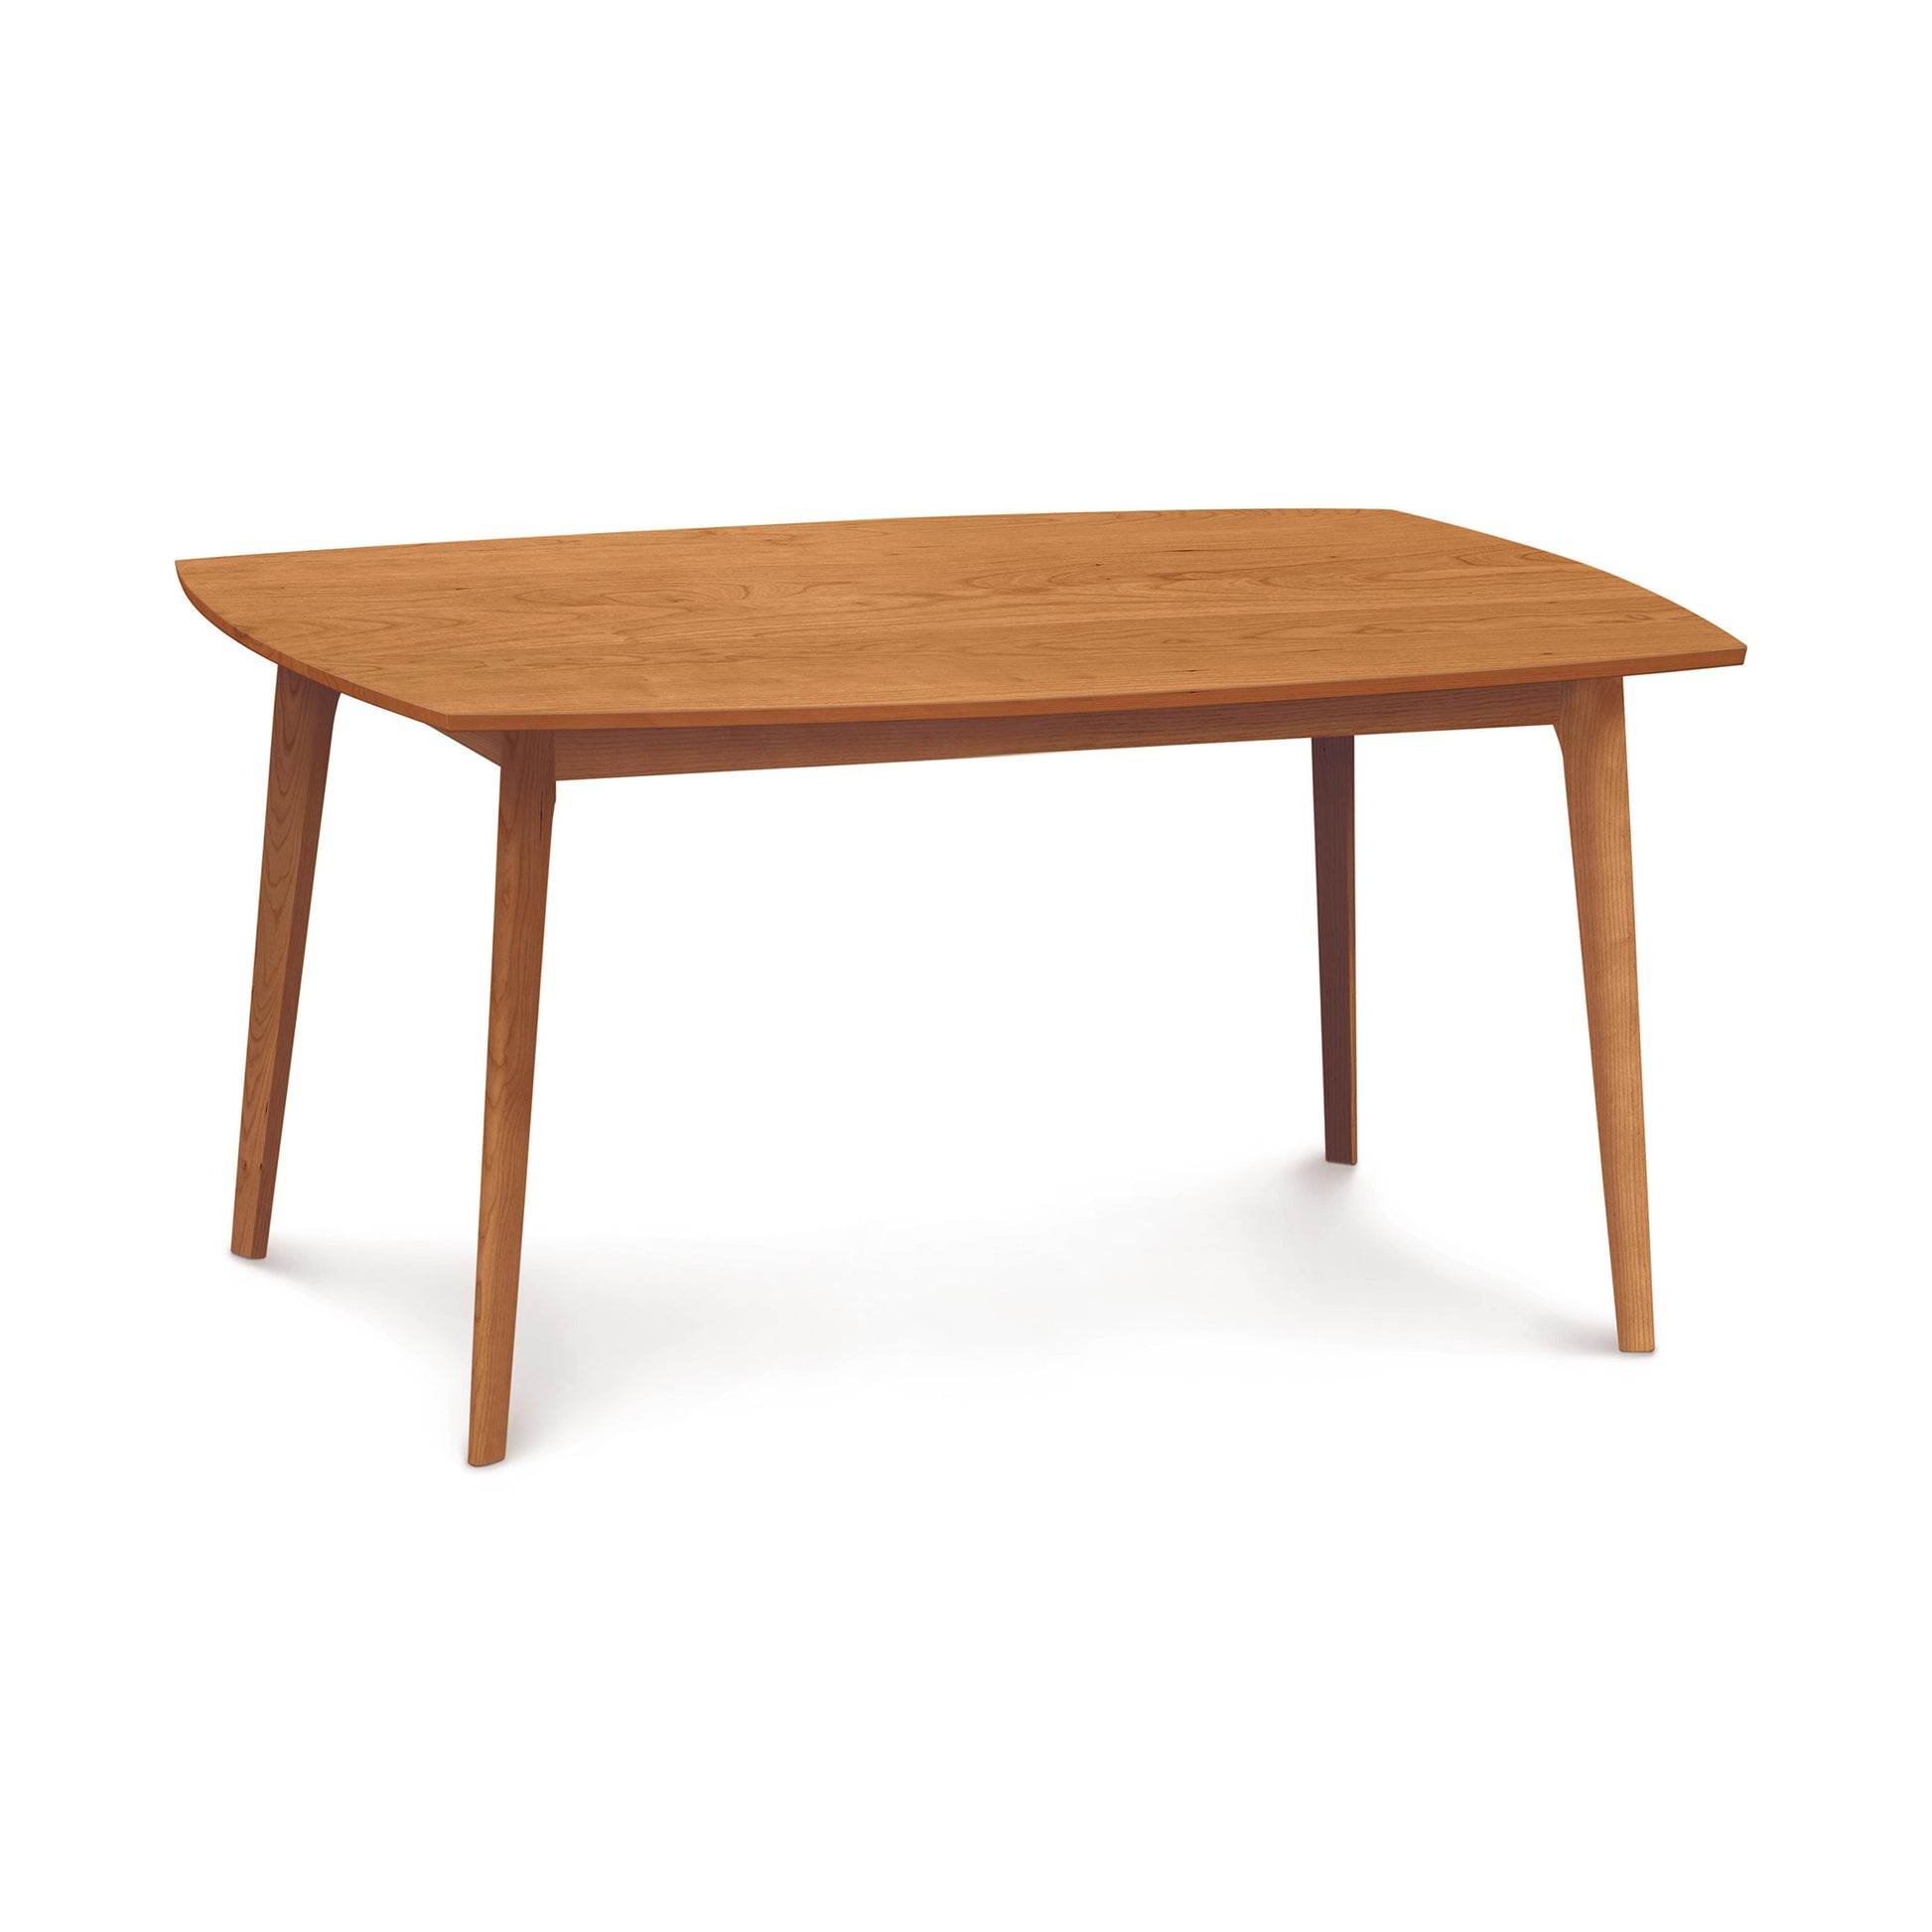 A wooden Copeland Furniture Catalina Solid-Top Table with a simple, modern design and four tapered legs, isolated on a white background.